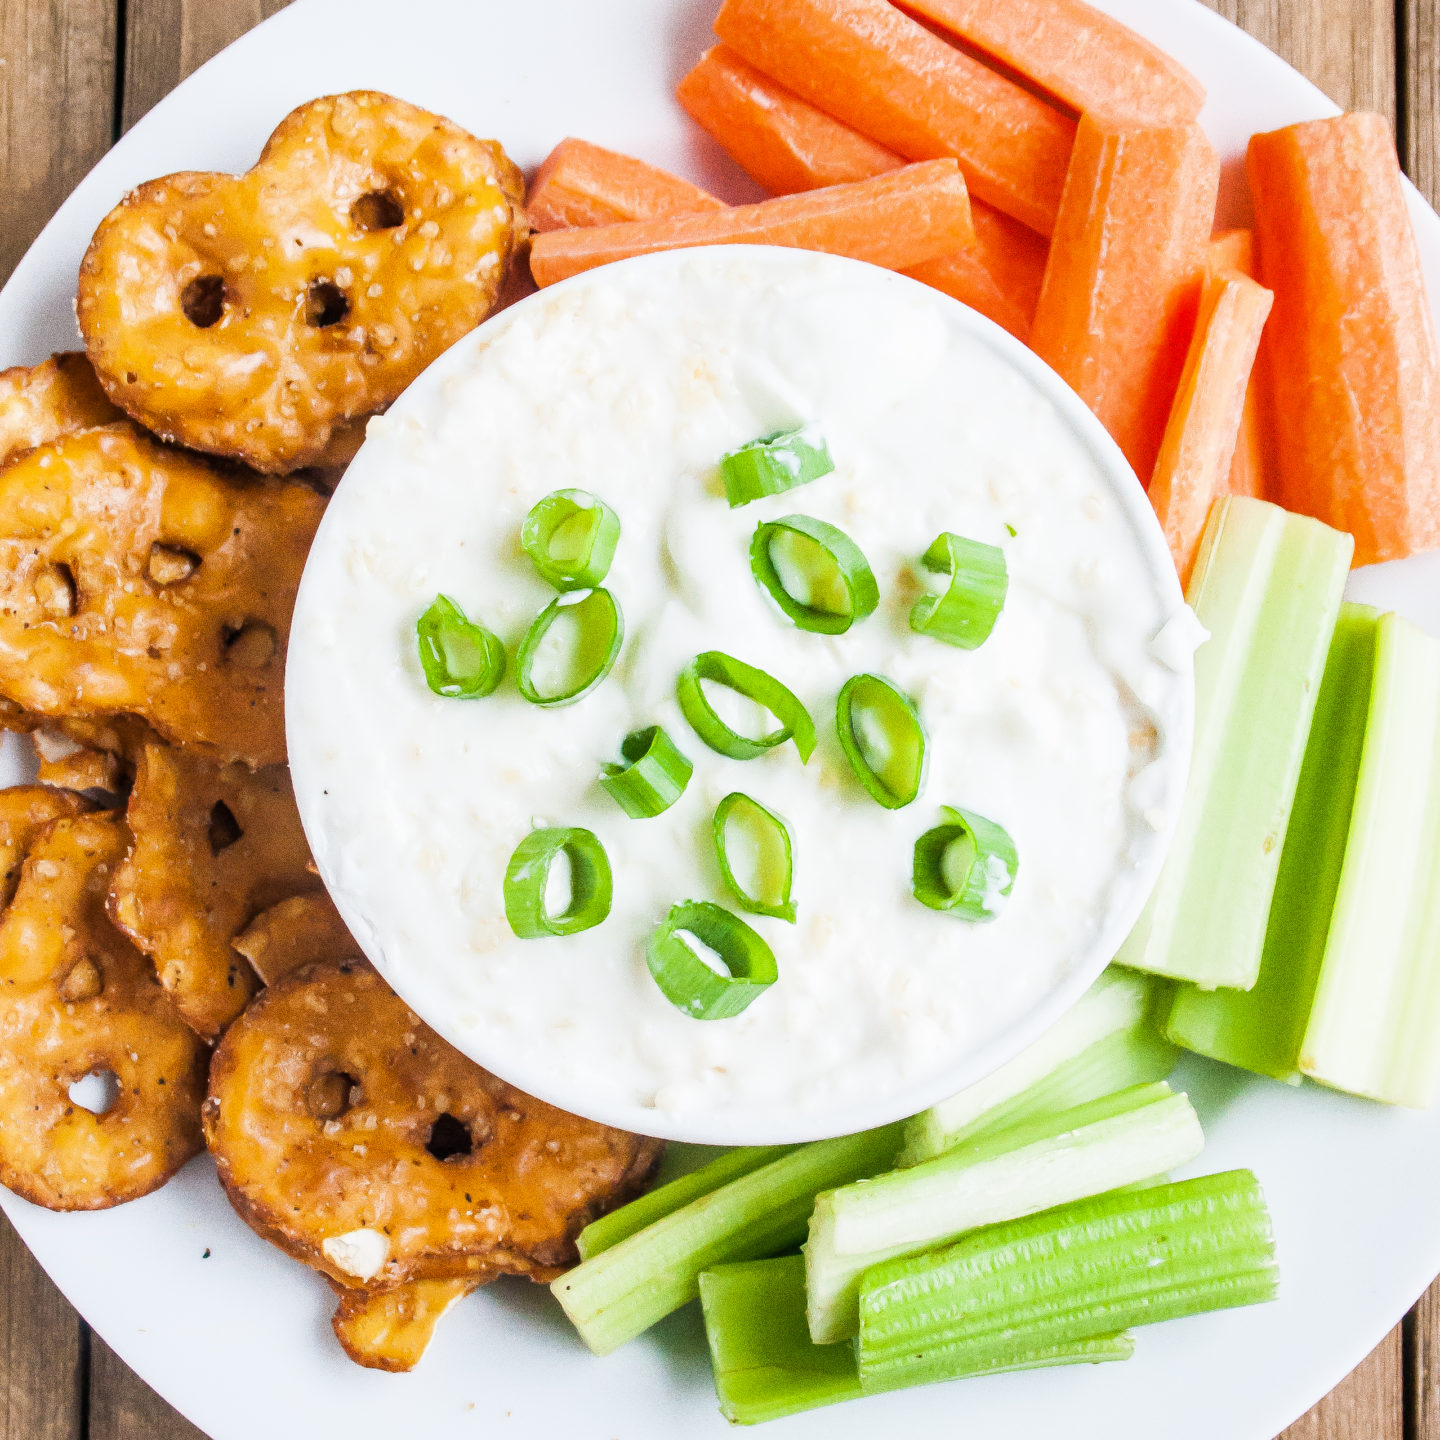 Healthy Sour Cream and Onion Dip